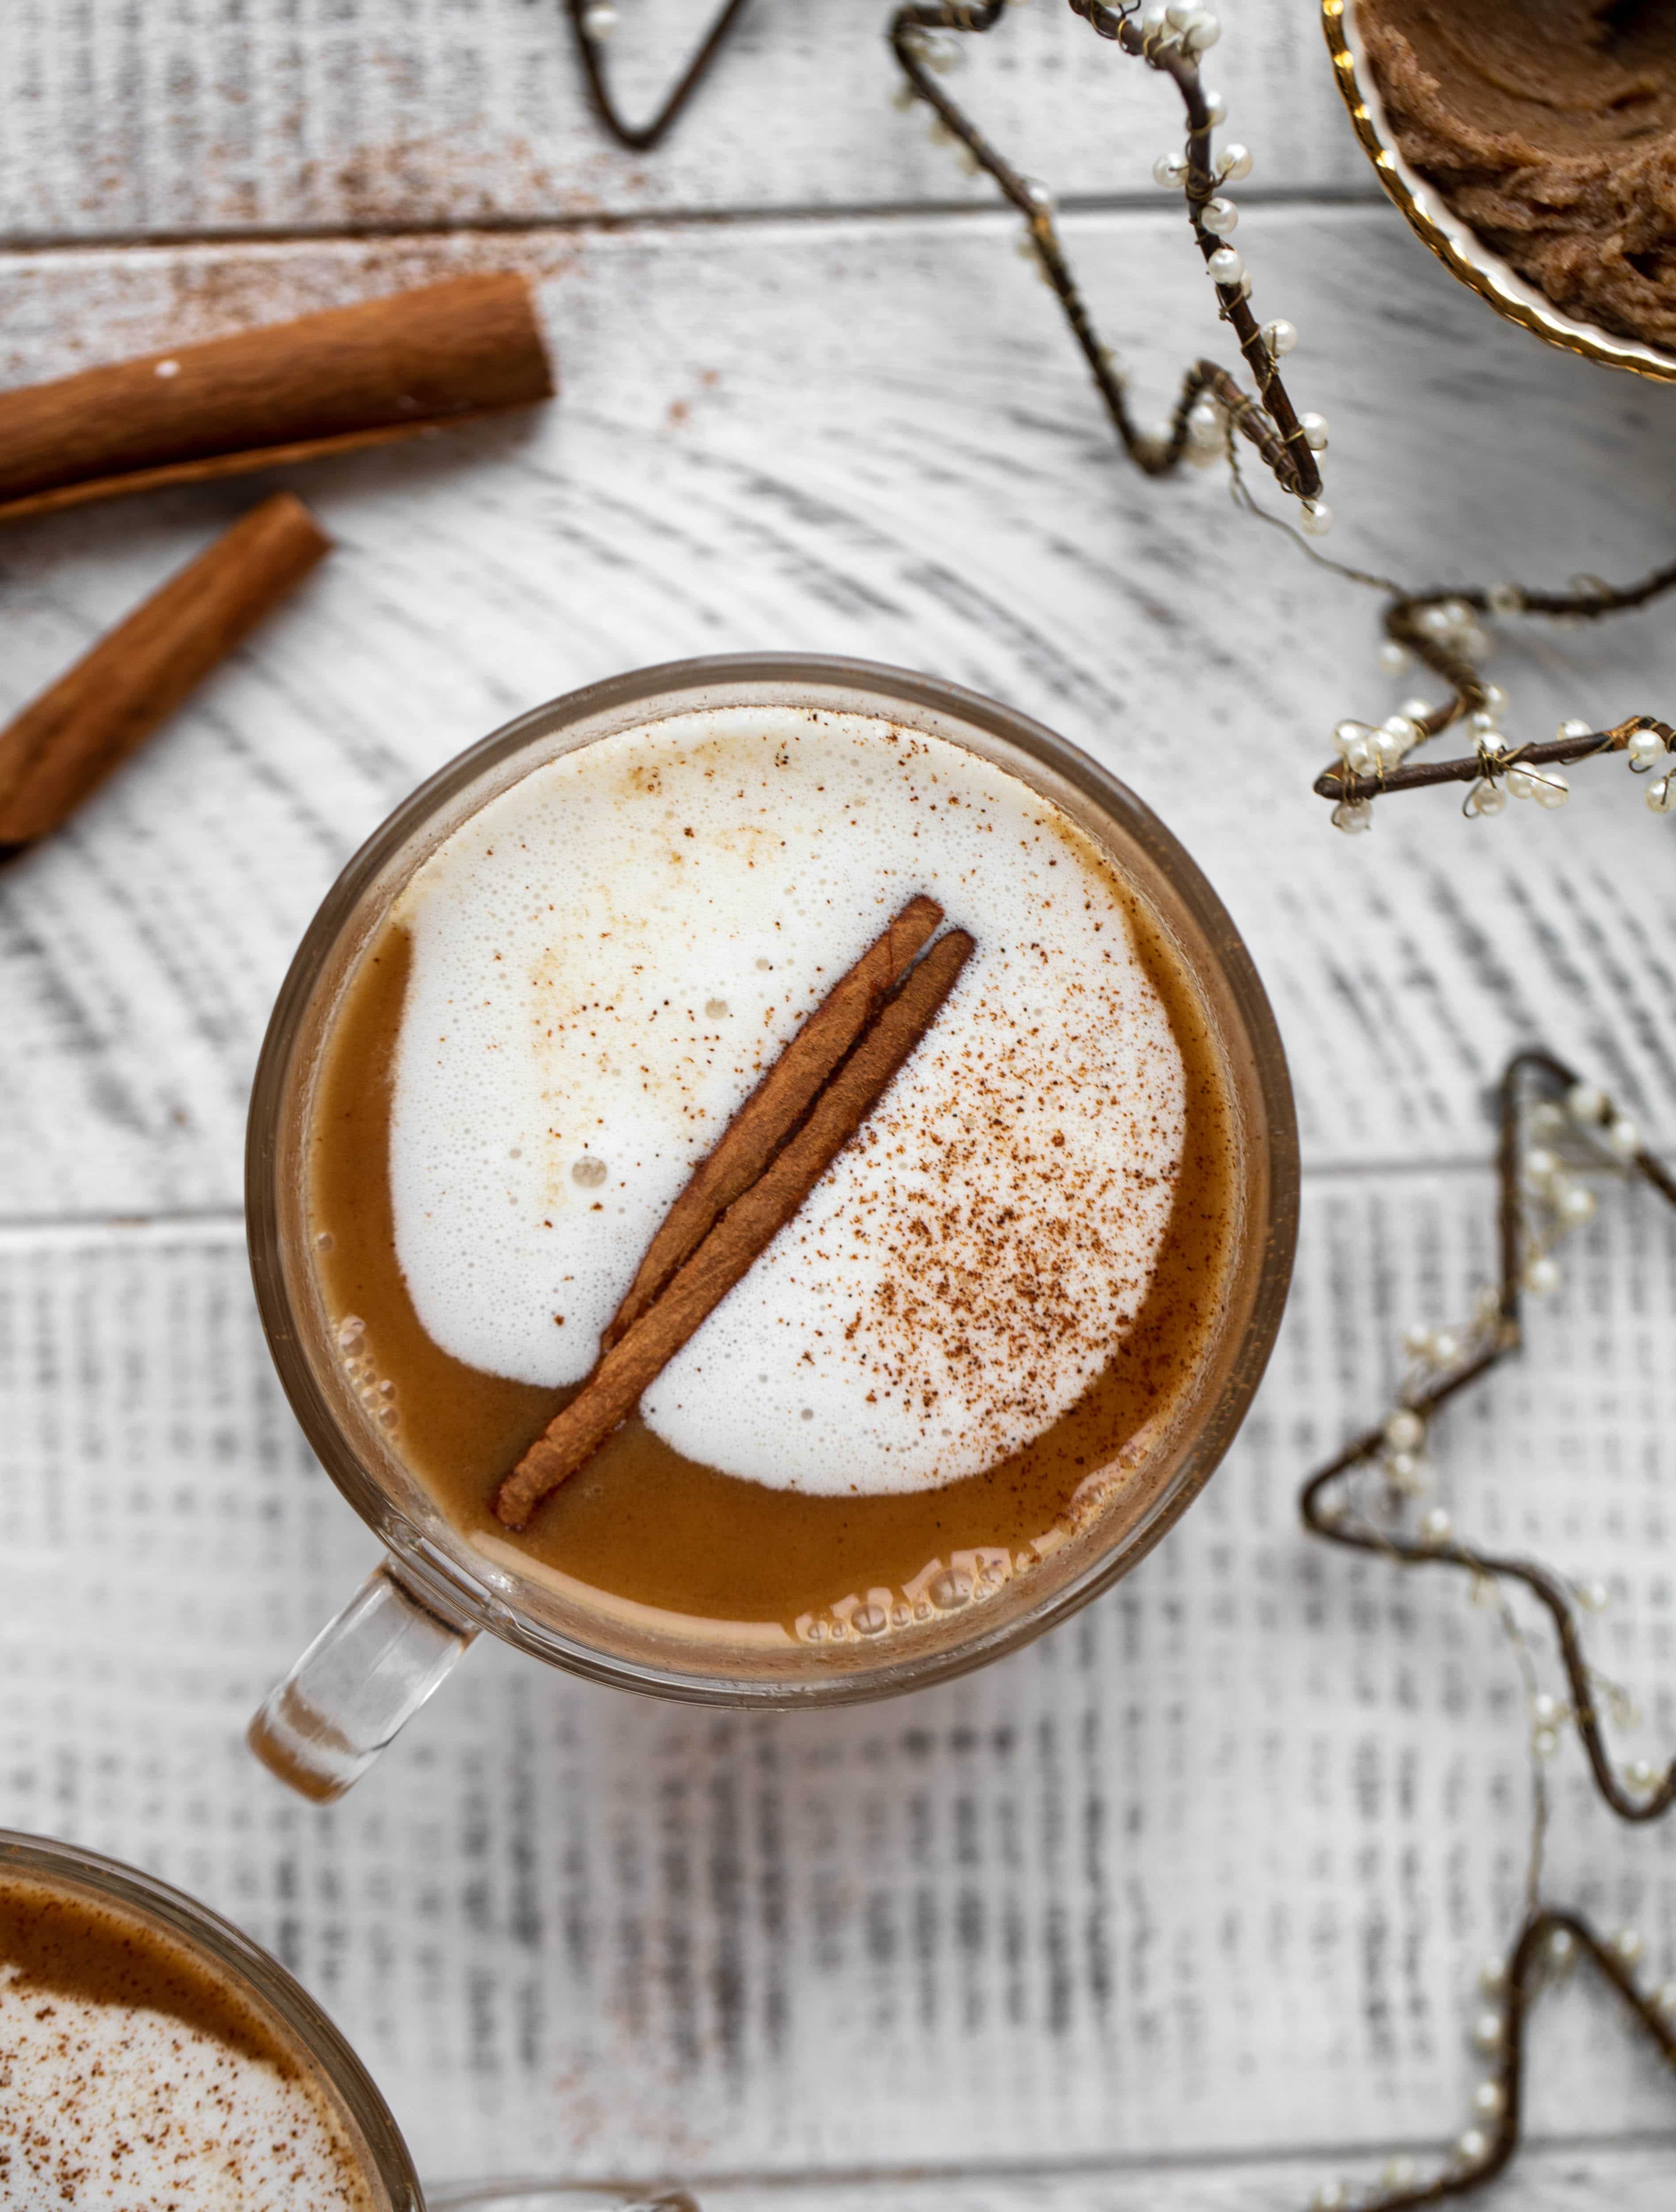 Hot buttered bourbon is a warming, spiced cozy drink that is perfect for chilly nights! Save batter in the fridge so you can have it whenever you'd like!